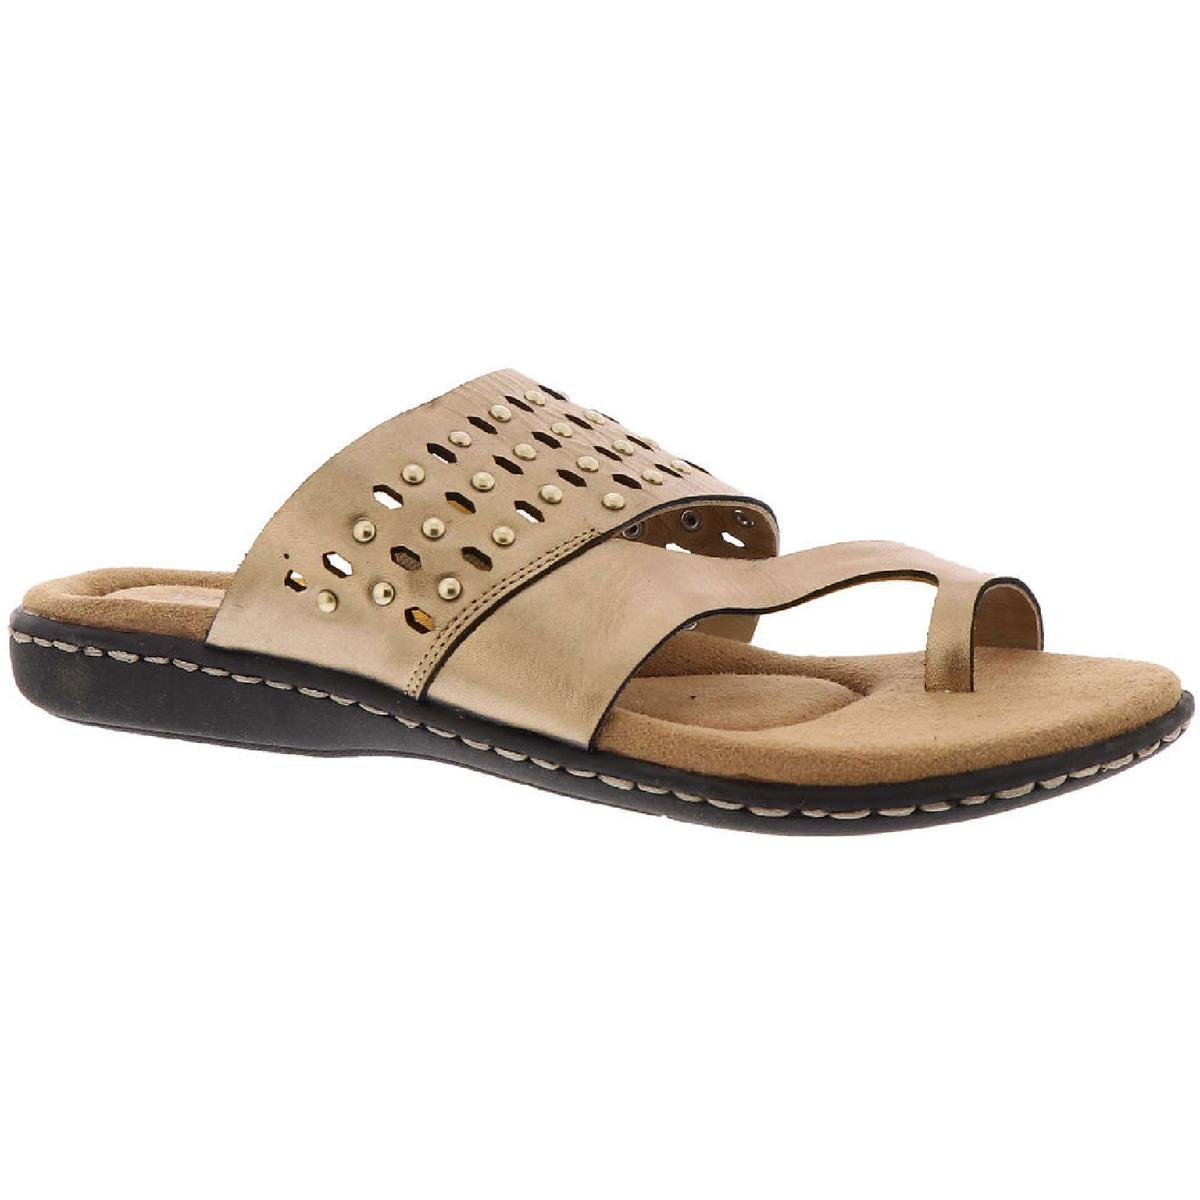 Array Womens Catalina Leather Studded Toe Loop Slide Sandals Shoes BHFO ...